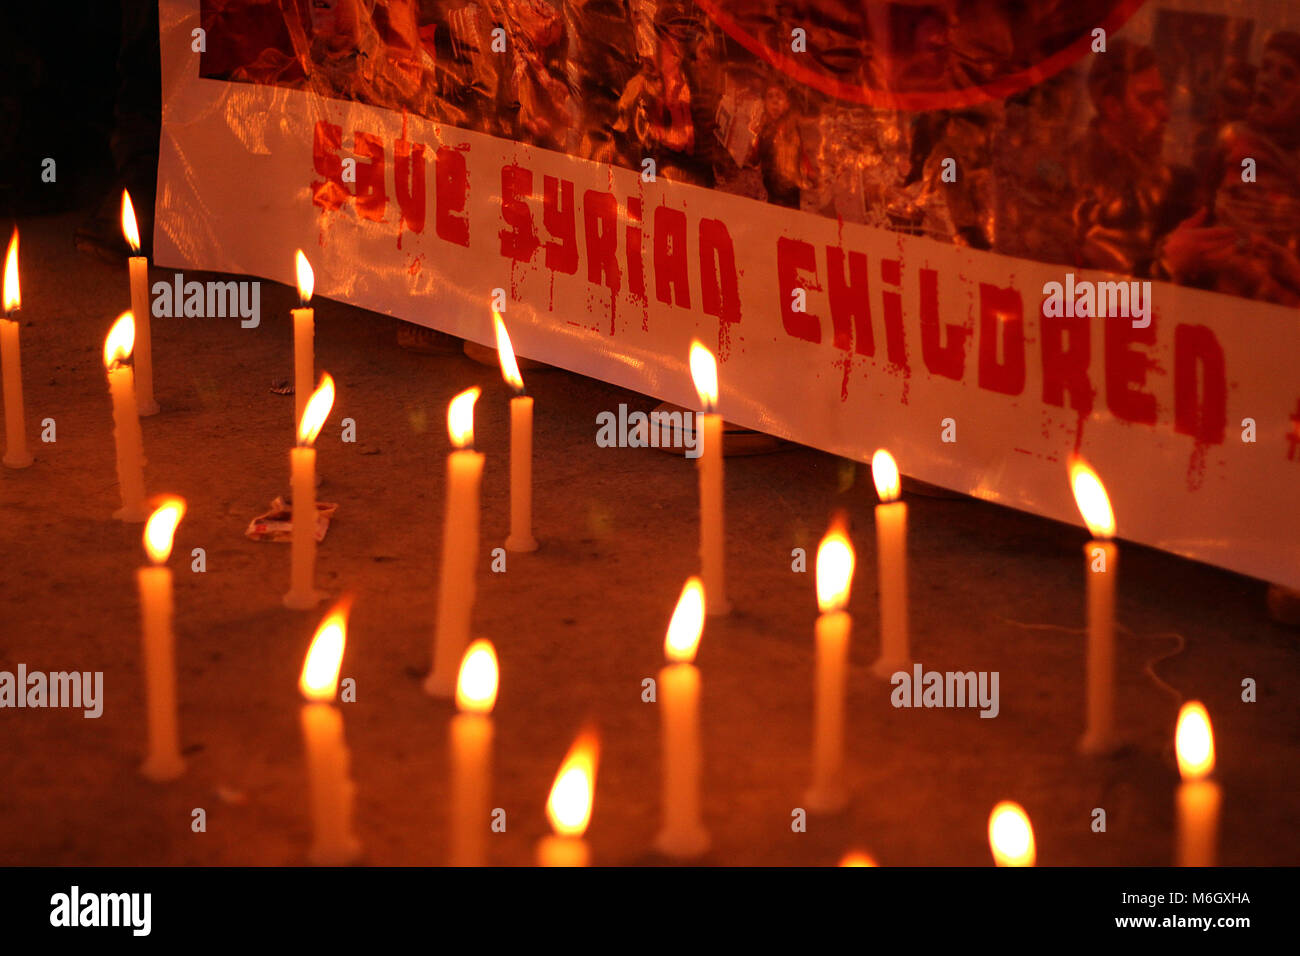 Srinagar, Jammu and Kashmir, India. 4th Mar, 2018. Candles are lit as people take part in candle-light vigil for Syrian children in Srinagar the summer capital of Indian administered Kashmir.More than 600 people have been killed including children and women after attacks in past two weeks in Ghouta, as Syrian government led by president Bashar-Al-Assad and Russian forces continued their aerial bombardment in Eastern part of Ghouta in Syria. Credit: Faisal Khan/ZUMA Wire/Alamy Live News Stock Photo